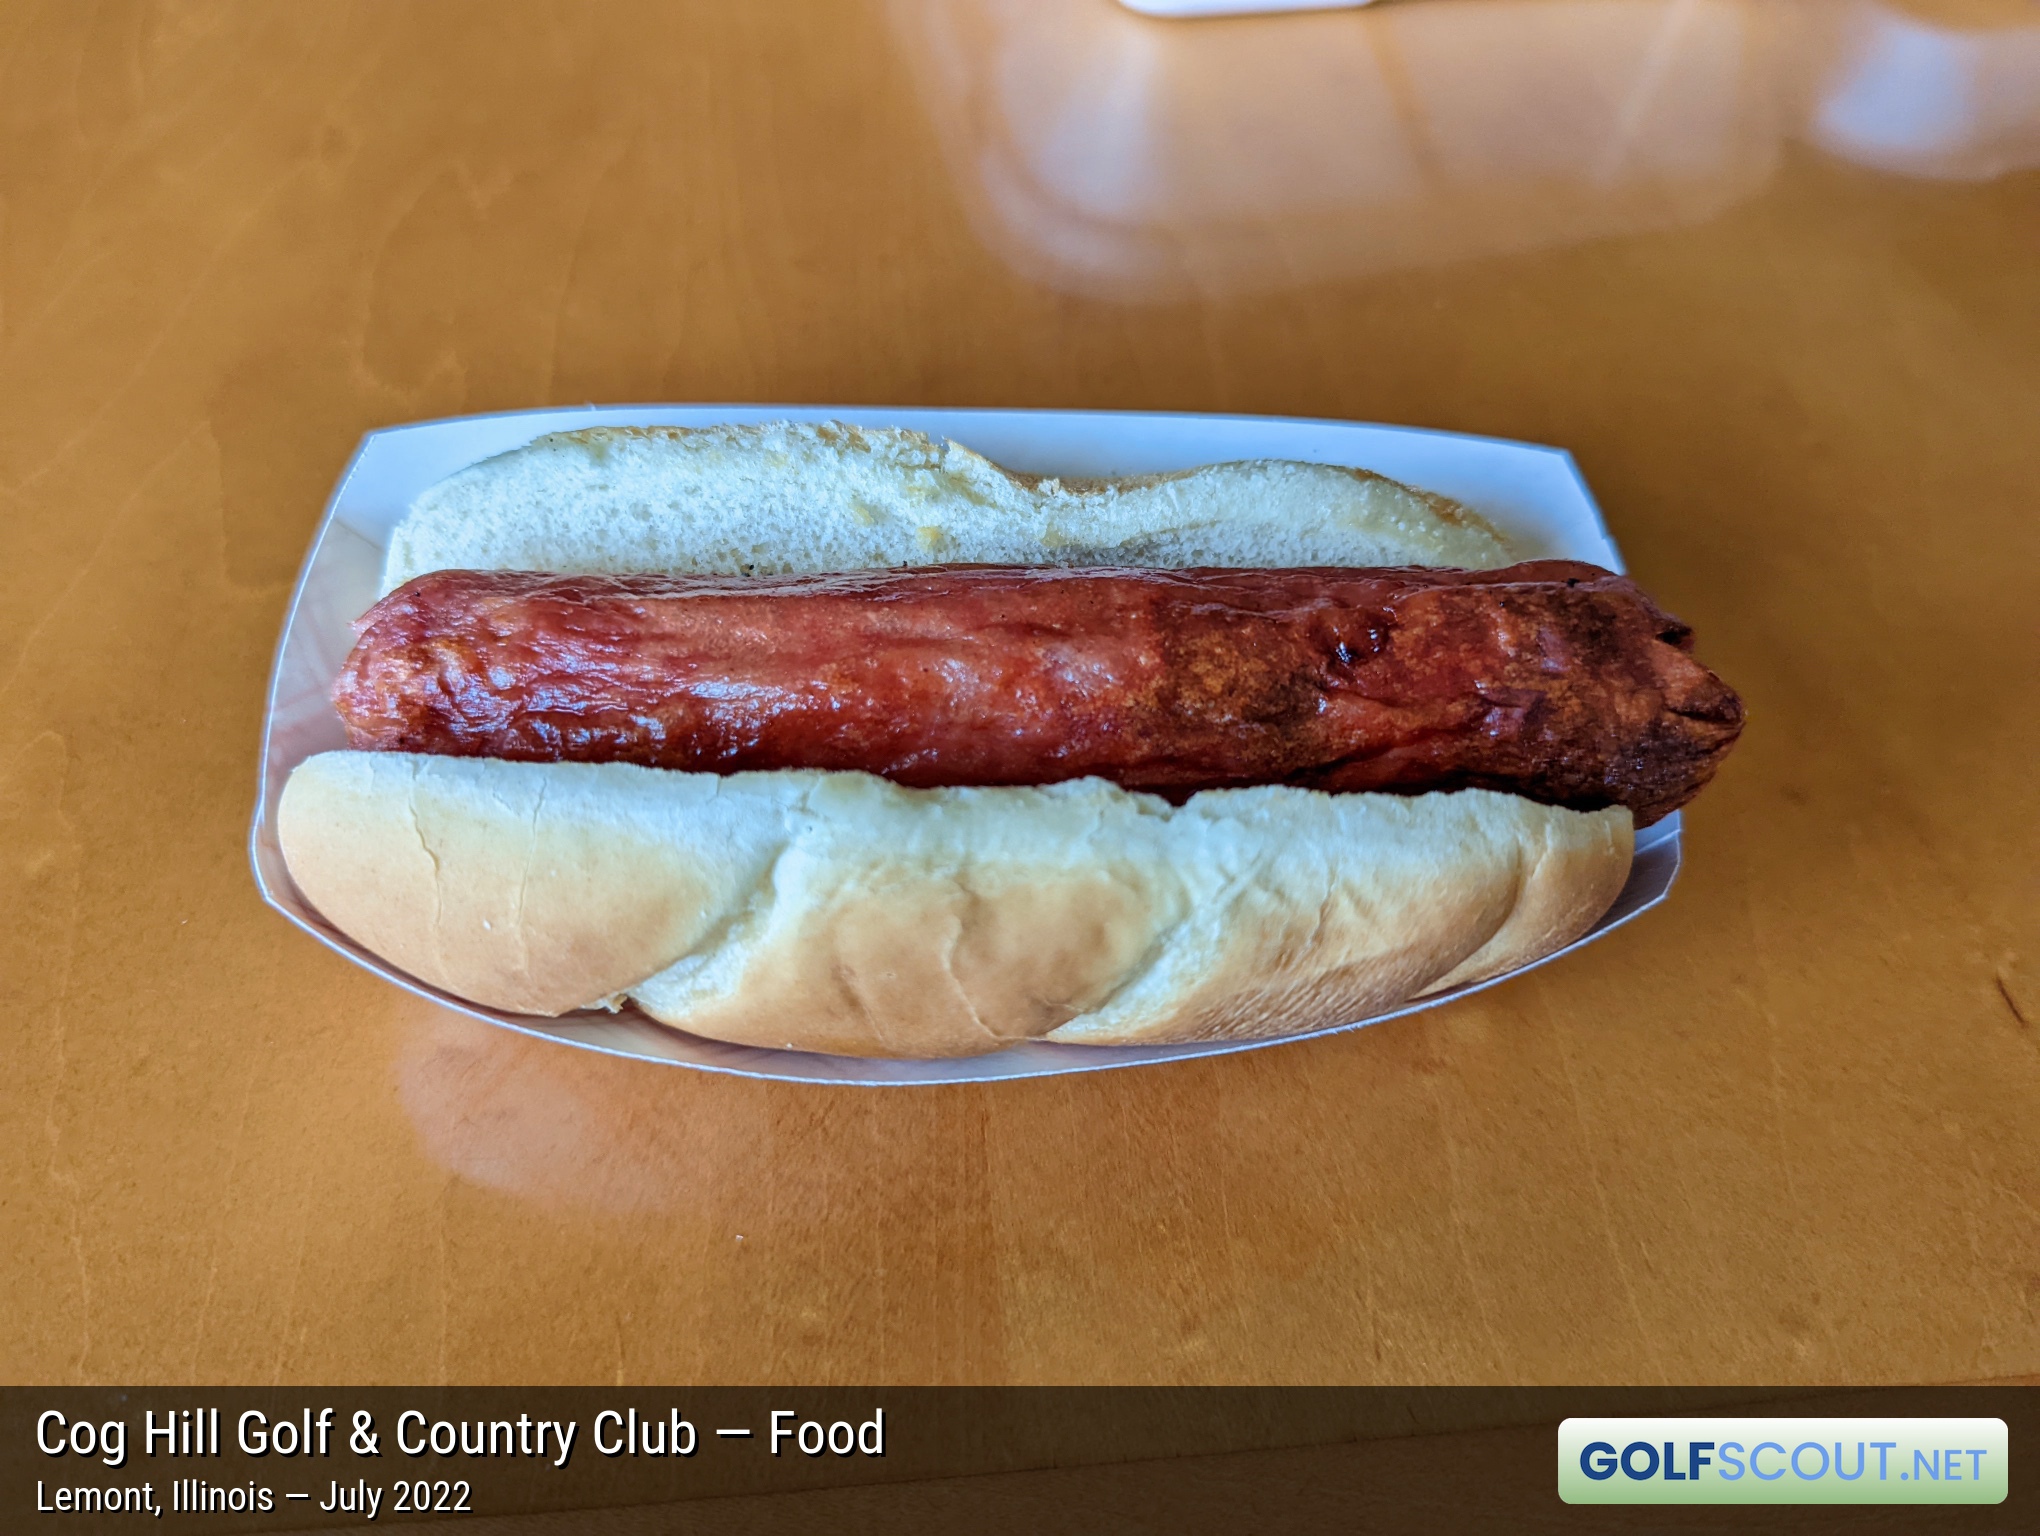 Photo of the food and dining at Cog Hill Course #2 - Ravines in Lemont, Illinois. Hot dog from Cog Hill. My quest to try a hot dog at every course in the Chicagoland area continues.